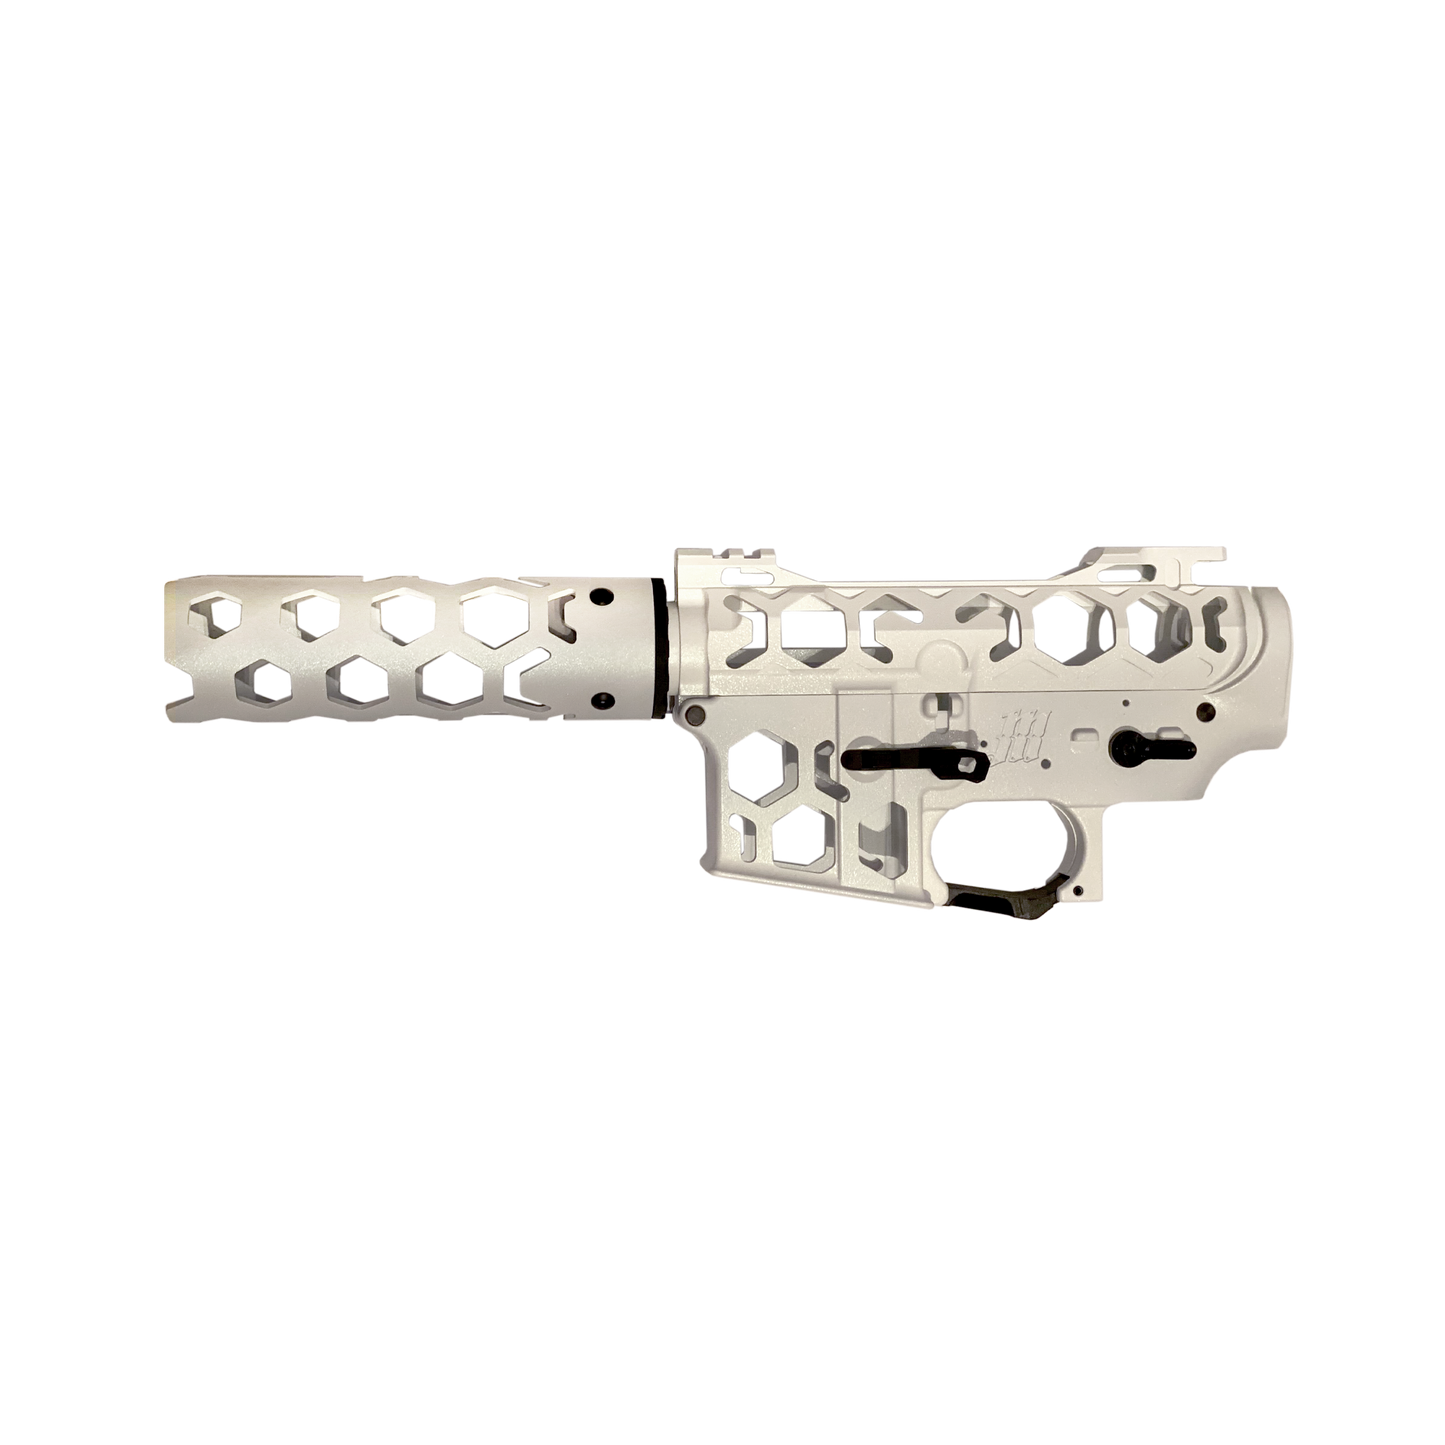 (DISCONTINUED) Monk Customs Neo3 Receiver + Handguard -  White